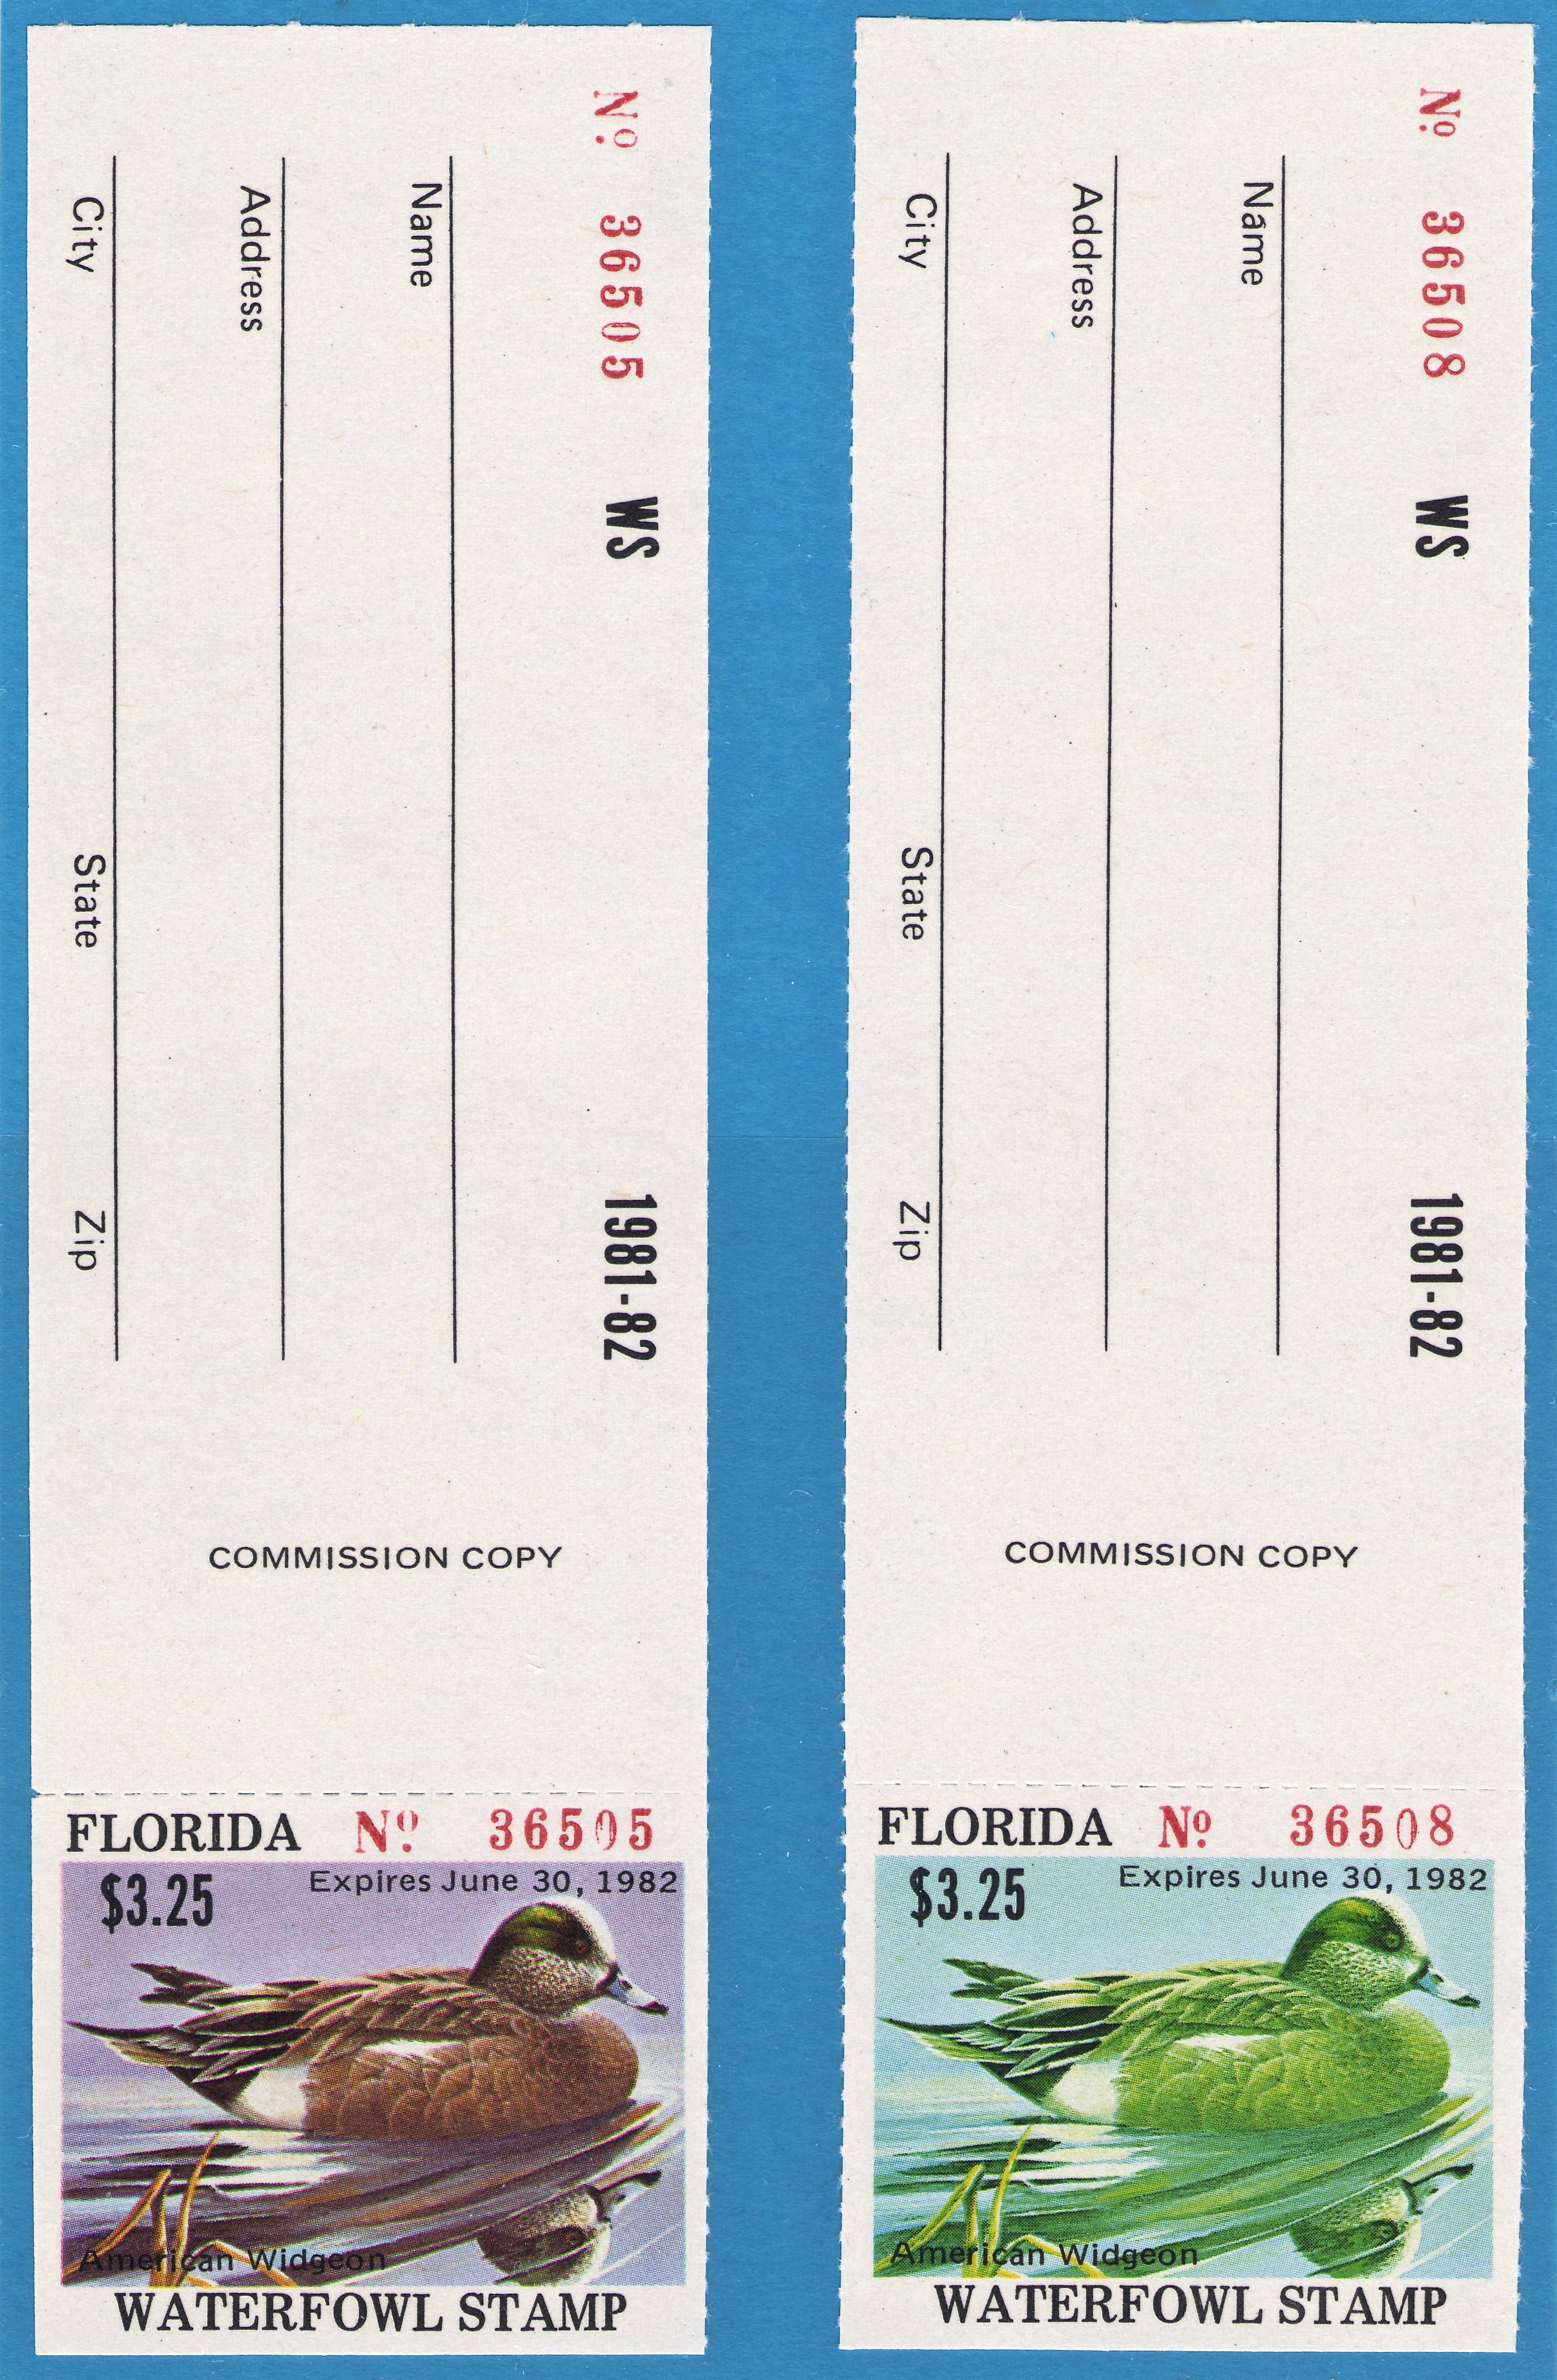 1981-82 Florida Waterfowl Normal (left) and Color Missing Error (right)